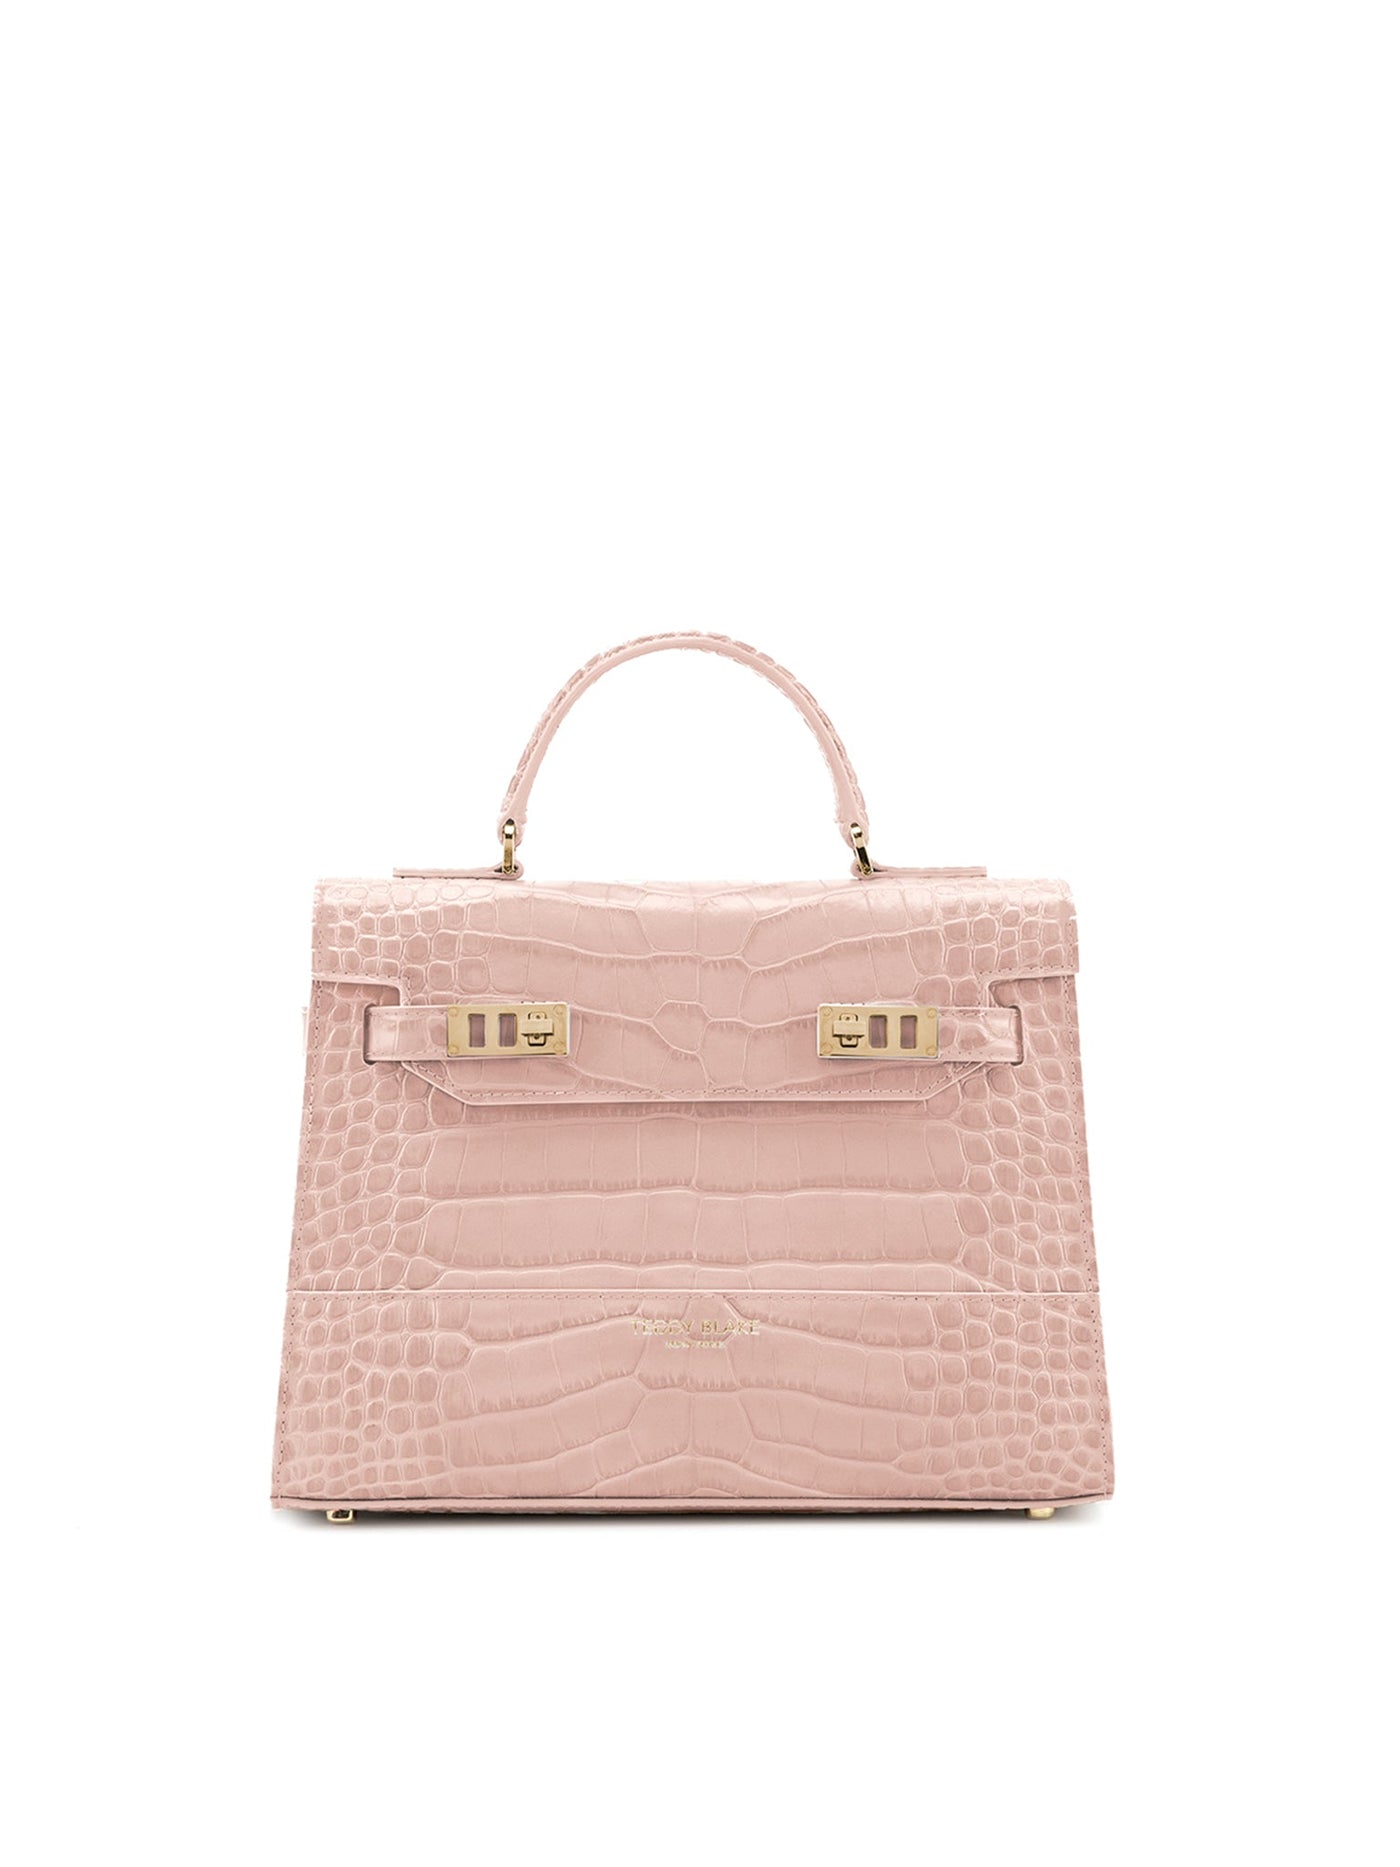 5 Best Hermes Replica Handbags to Get the Look for Less - MY CHIC